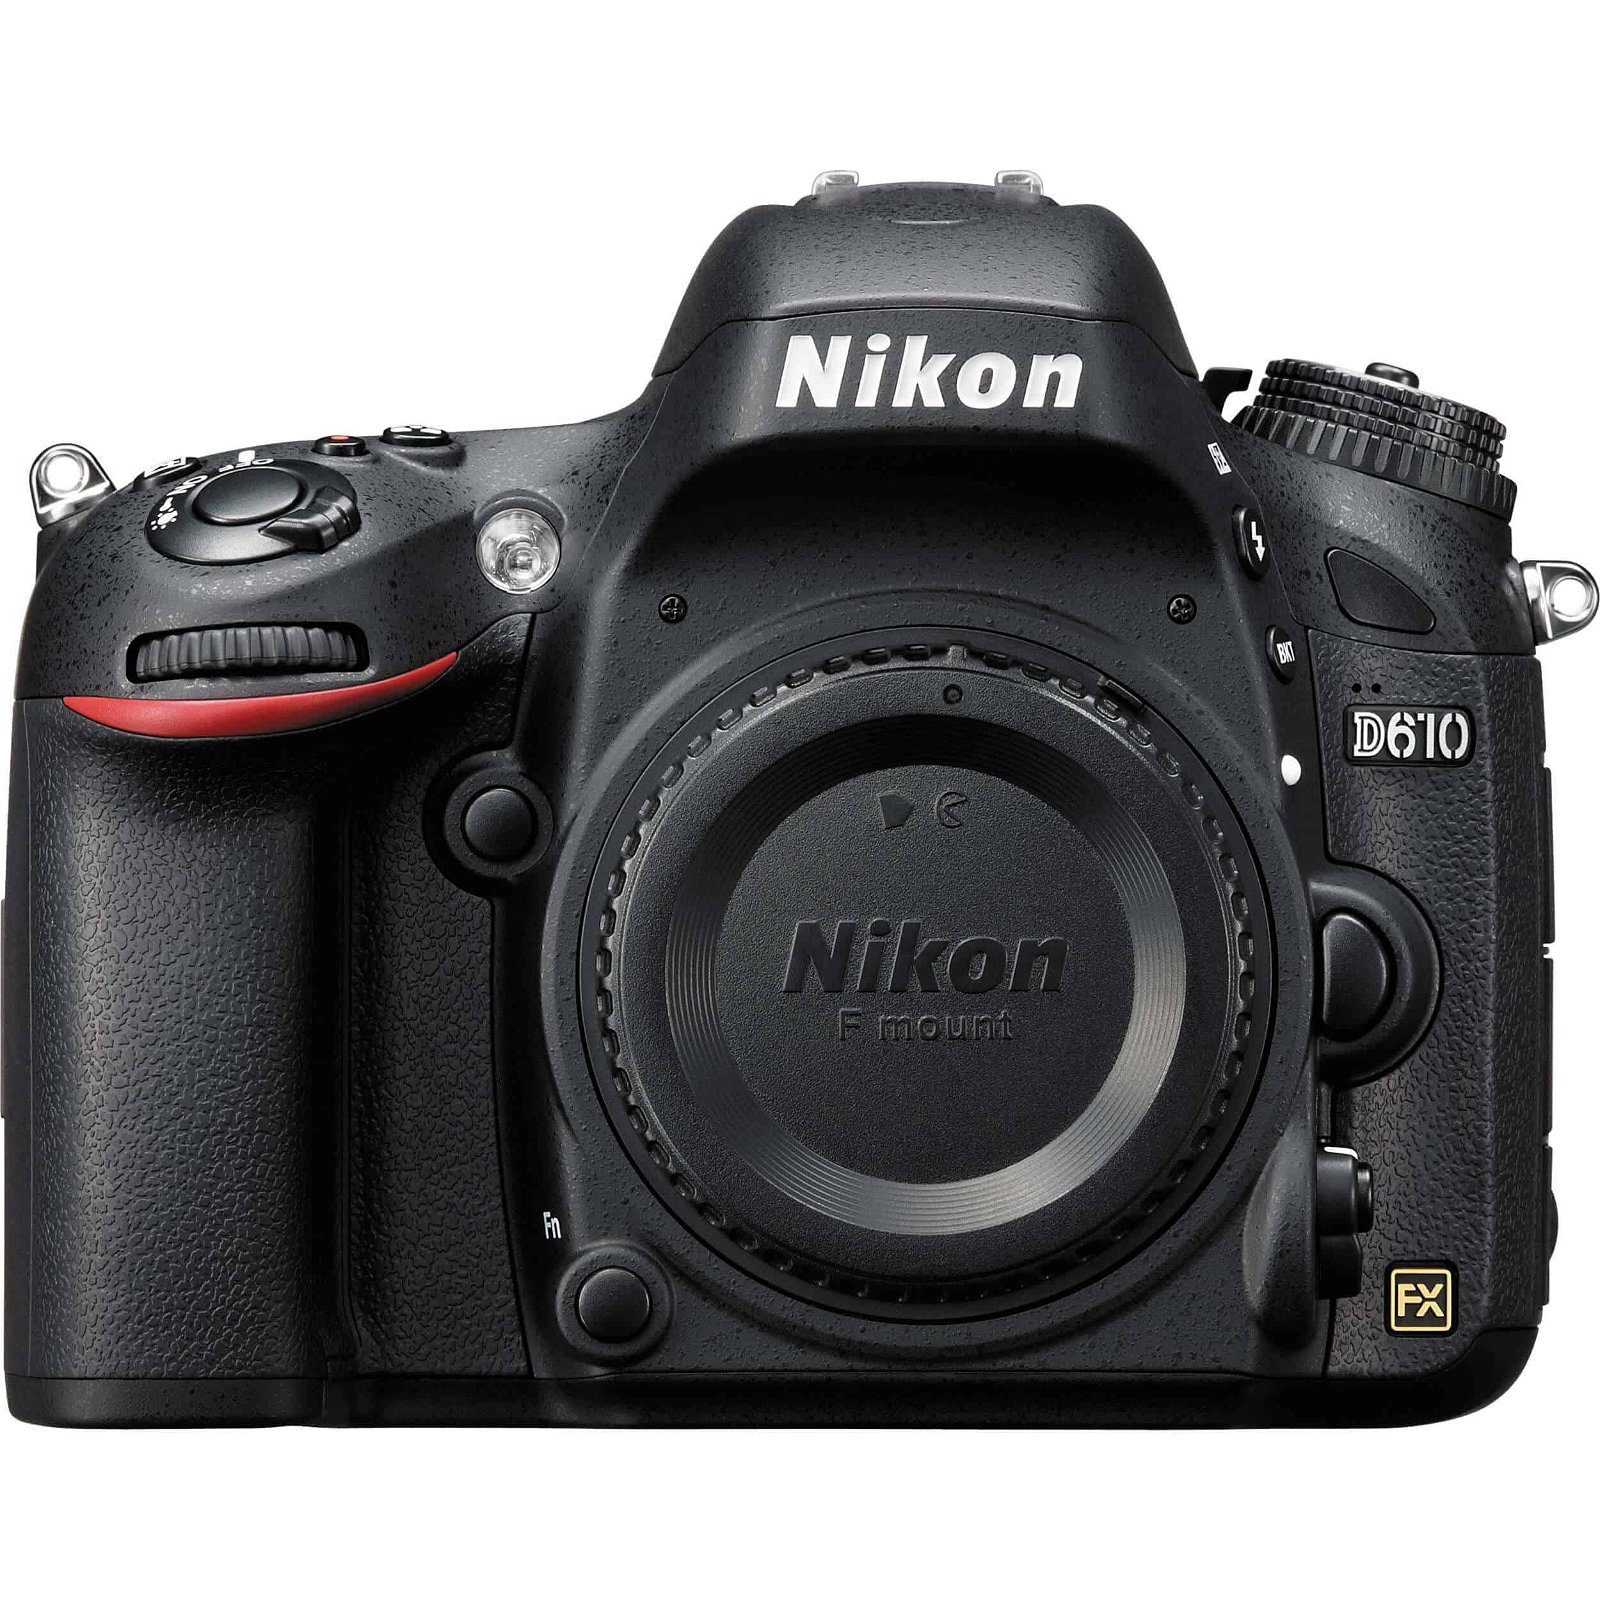 Nikon D610 is an old camera but it has some cool features for capturing fashion photos